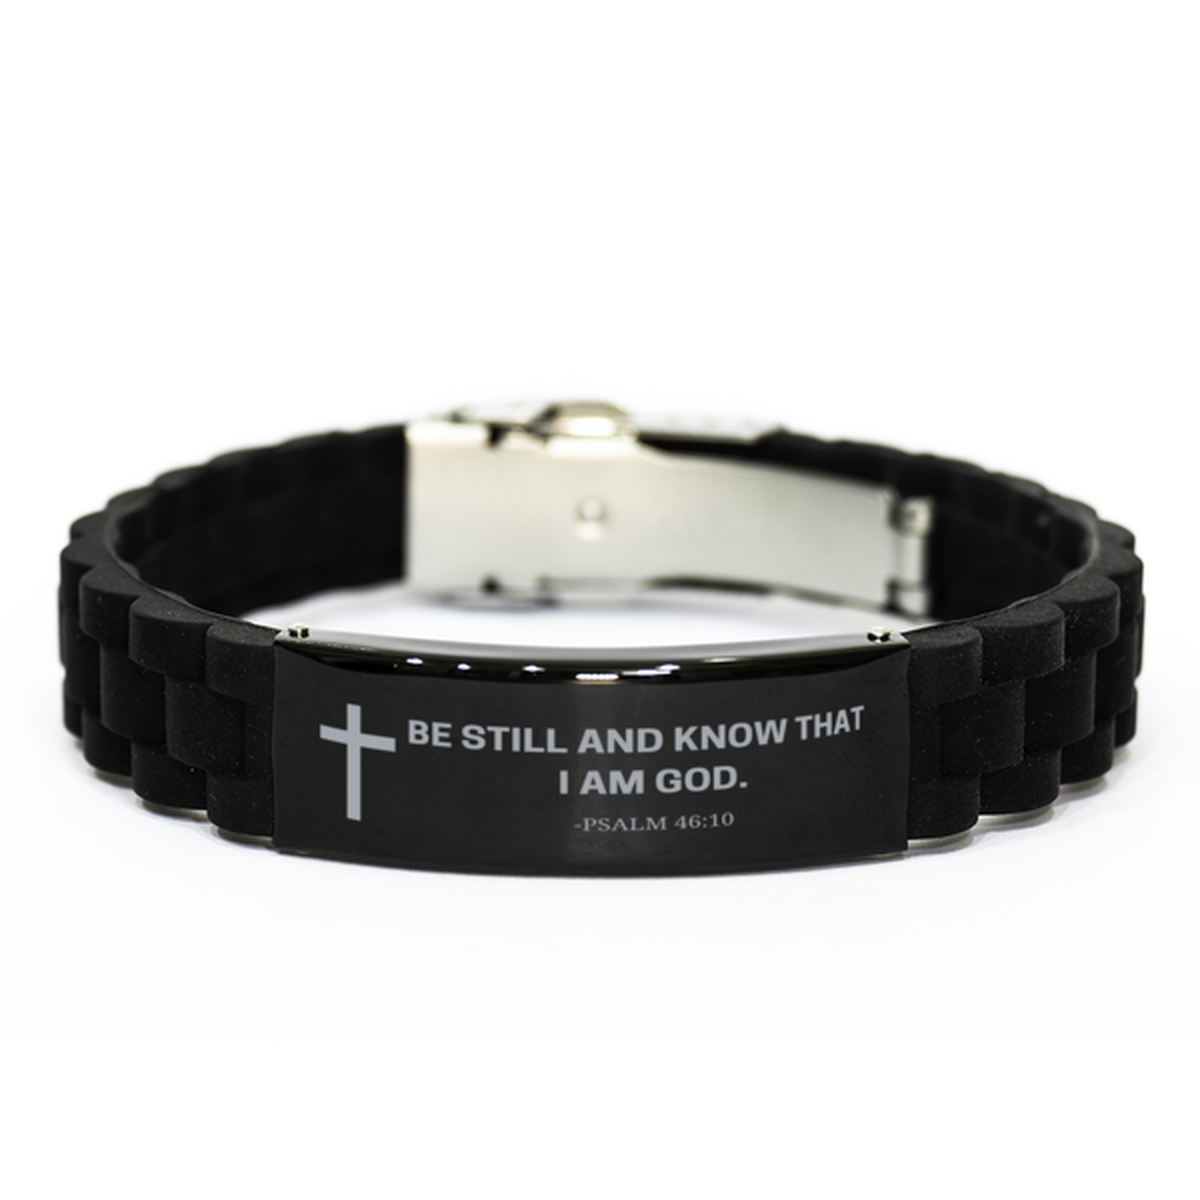 Baptism Gifts For Teenage Boys Girls, Christian Bible Verse Black Glidelock Clasp Bracelet, Be still and know that I am god, Catholic Confirmation Gifts for Son, Godson, Grandson, Nephew